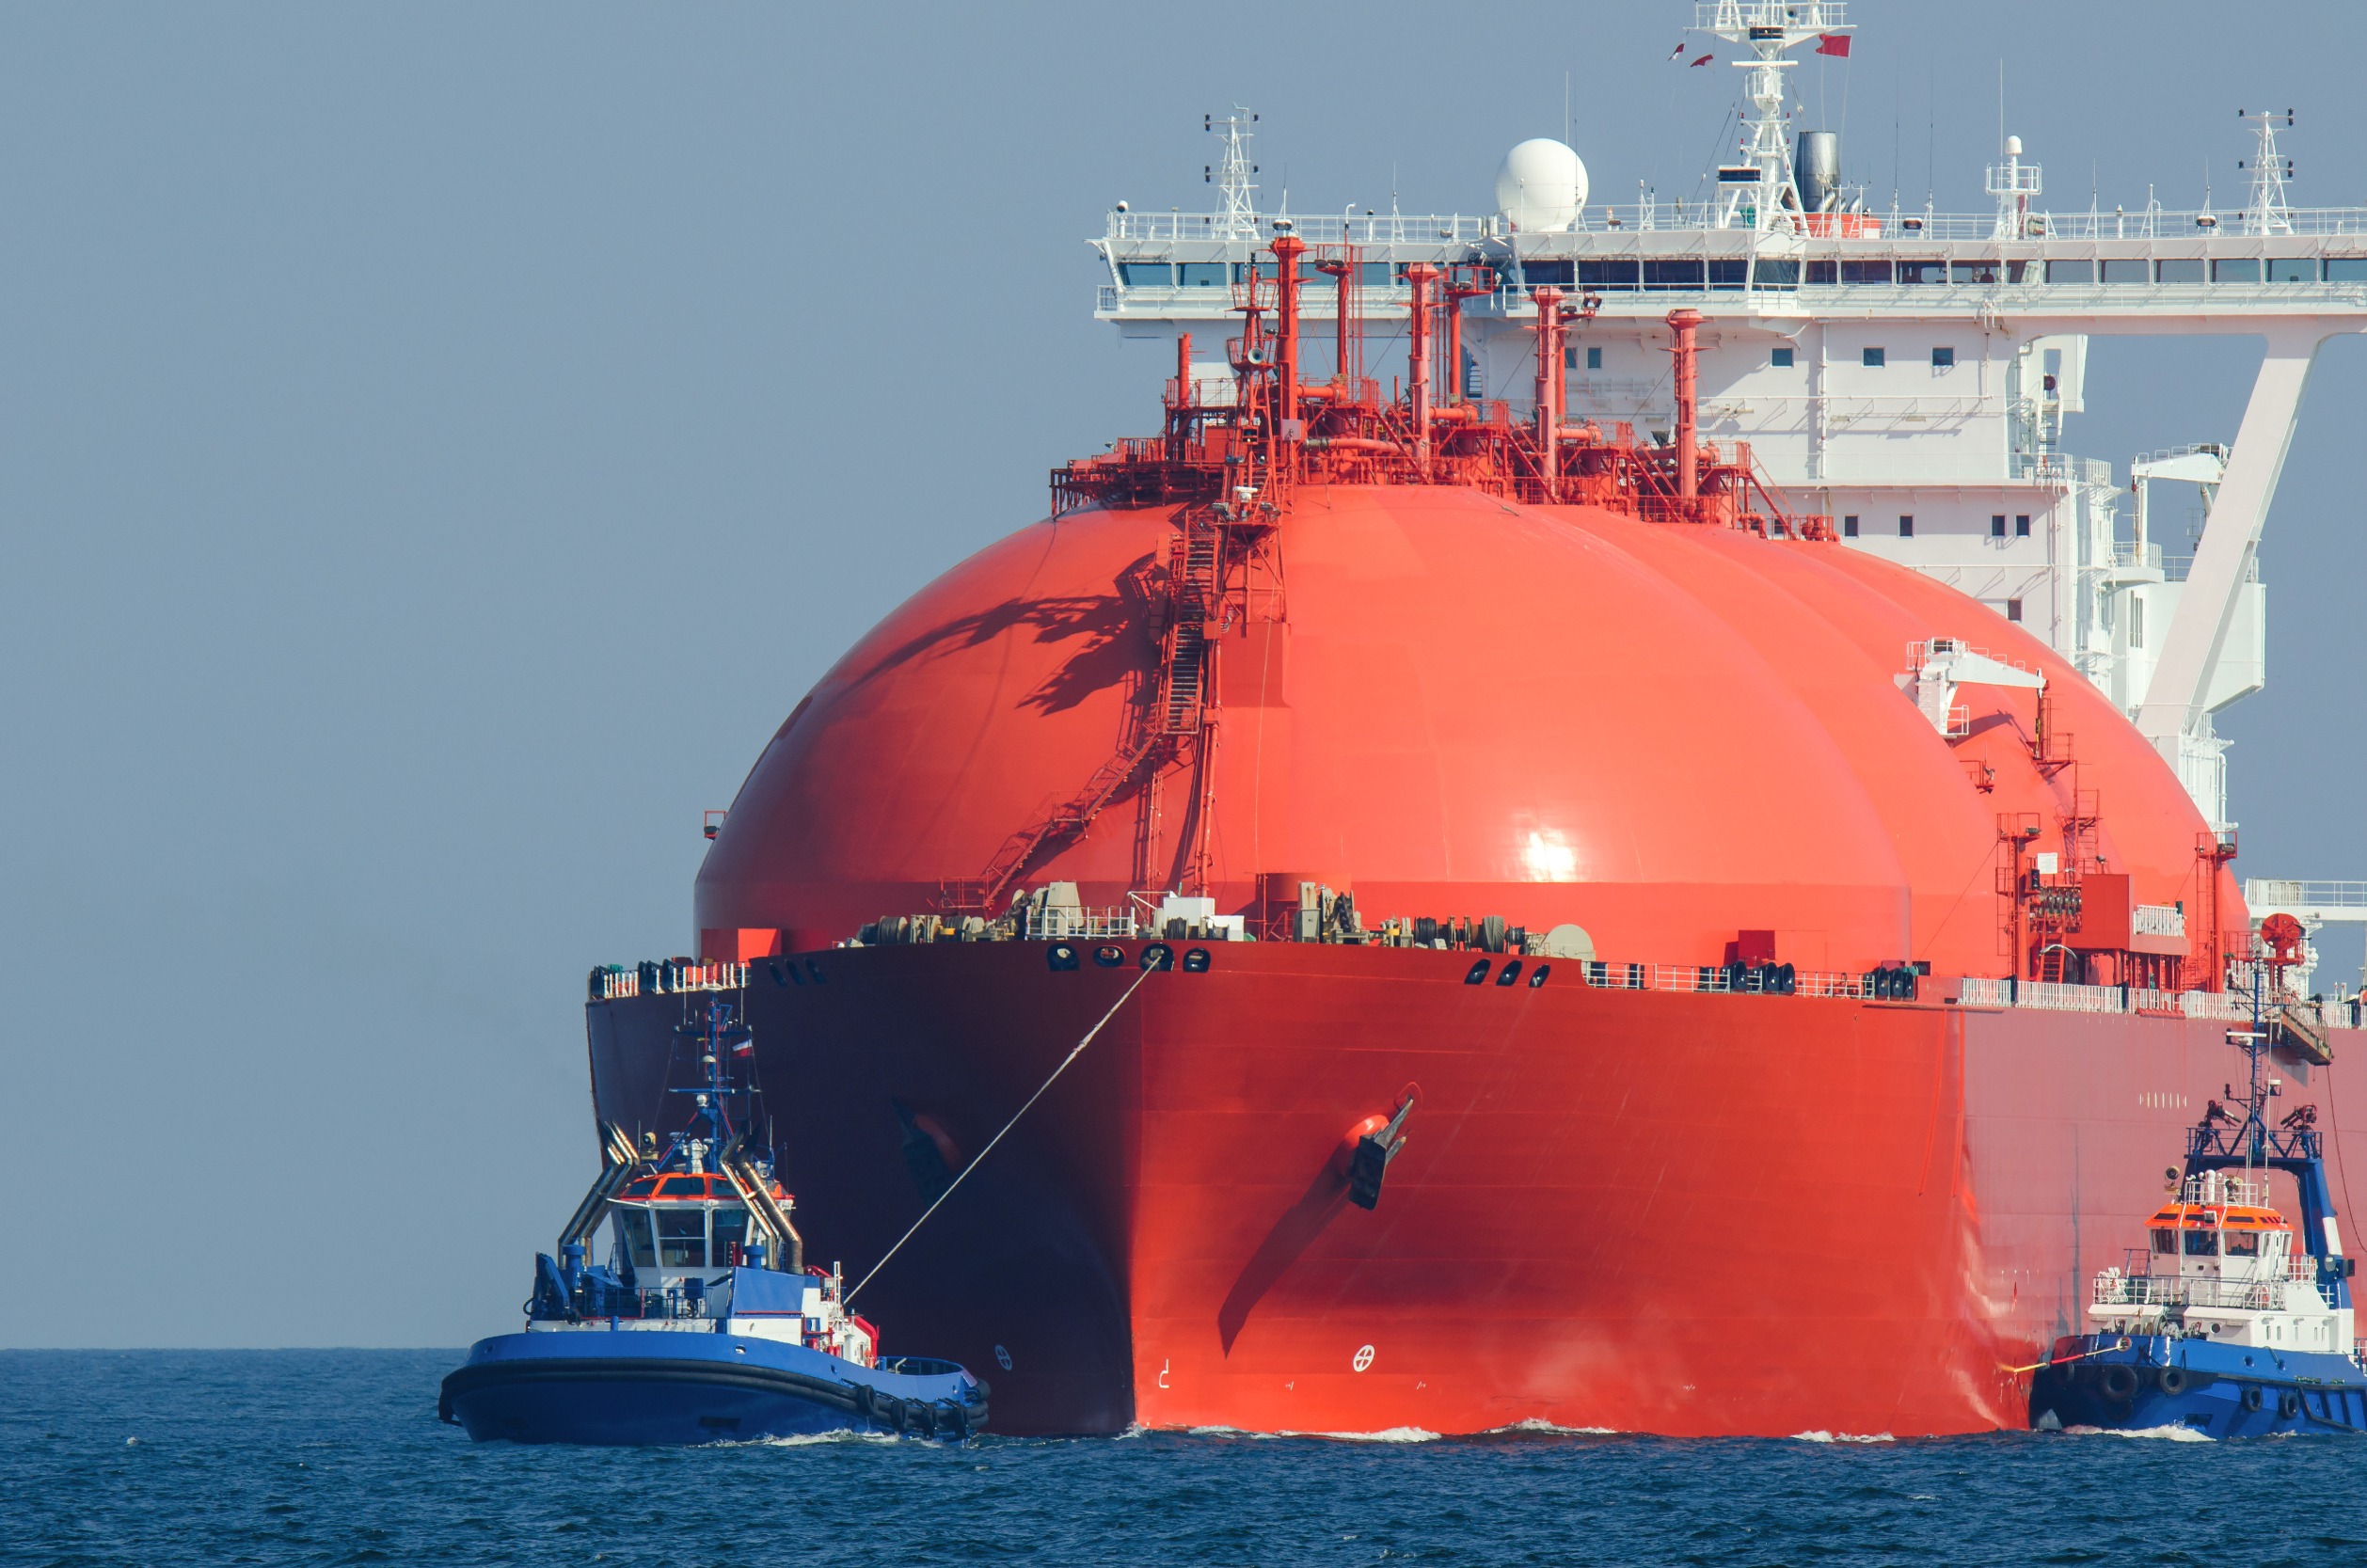 Canada’s LNG industry says it will reduce Asian emissions. Prove it.